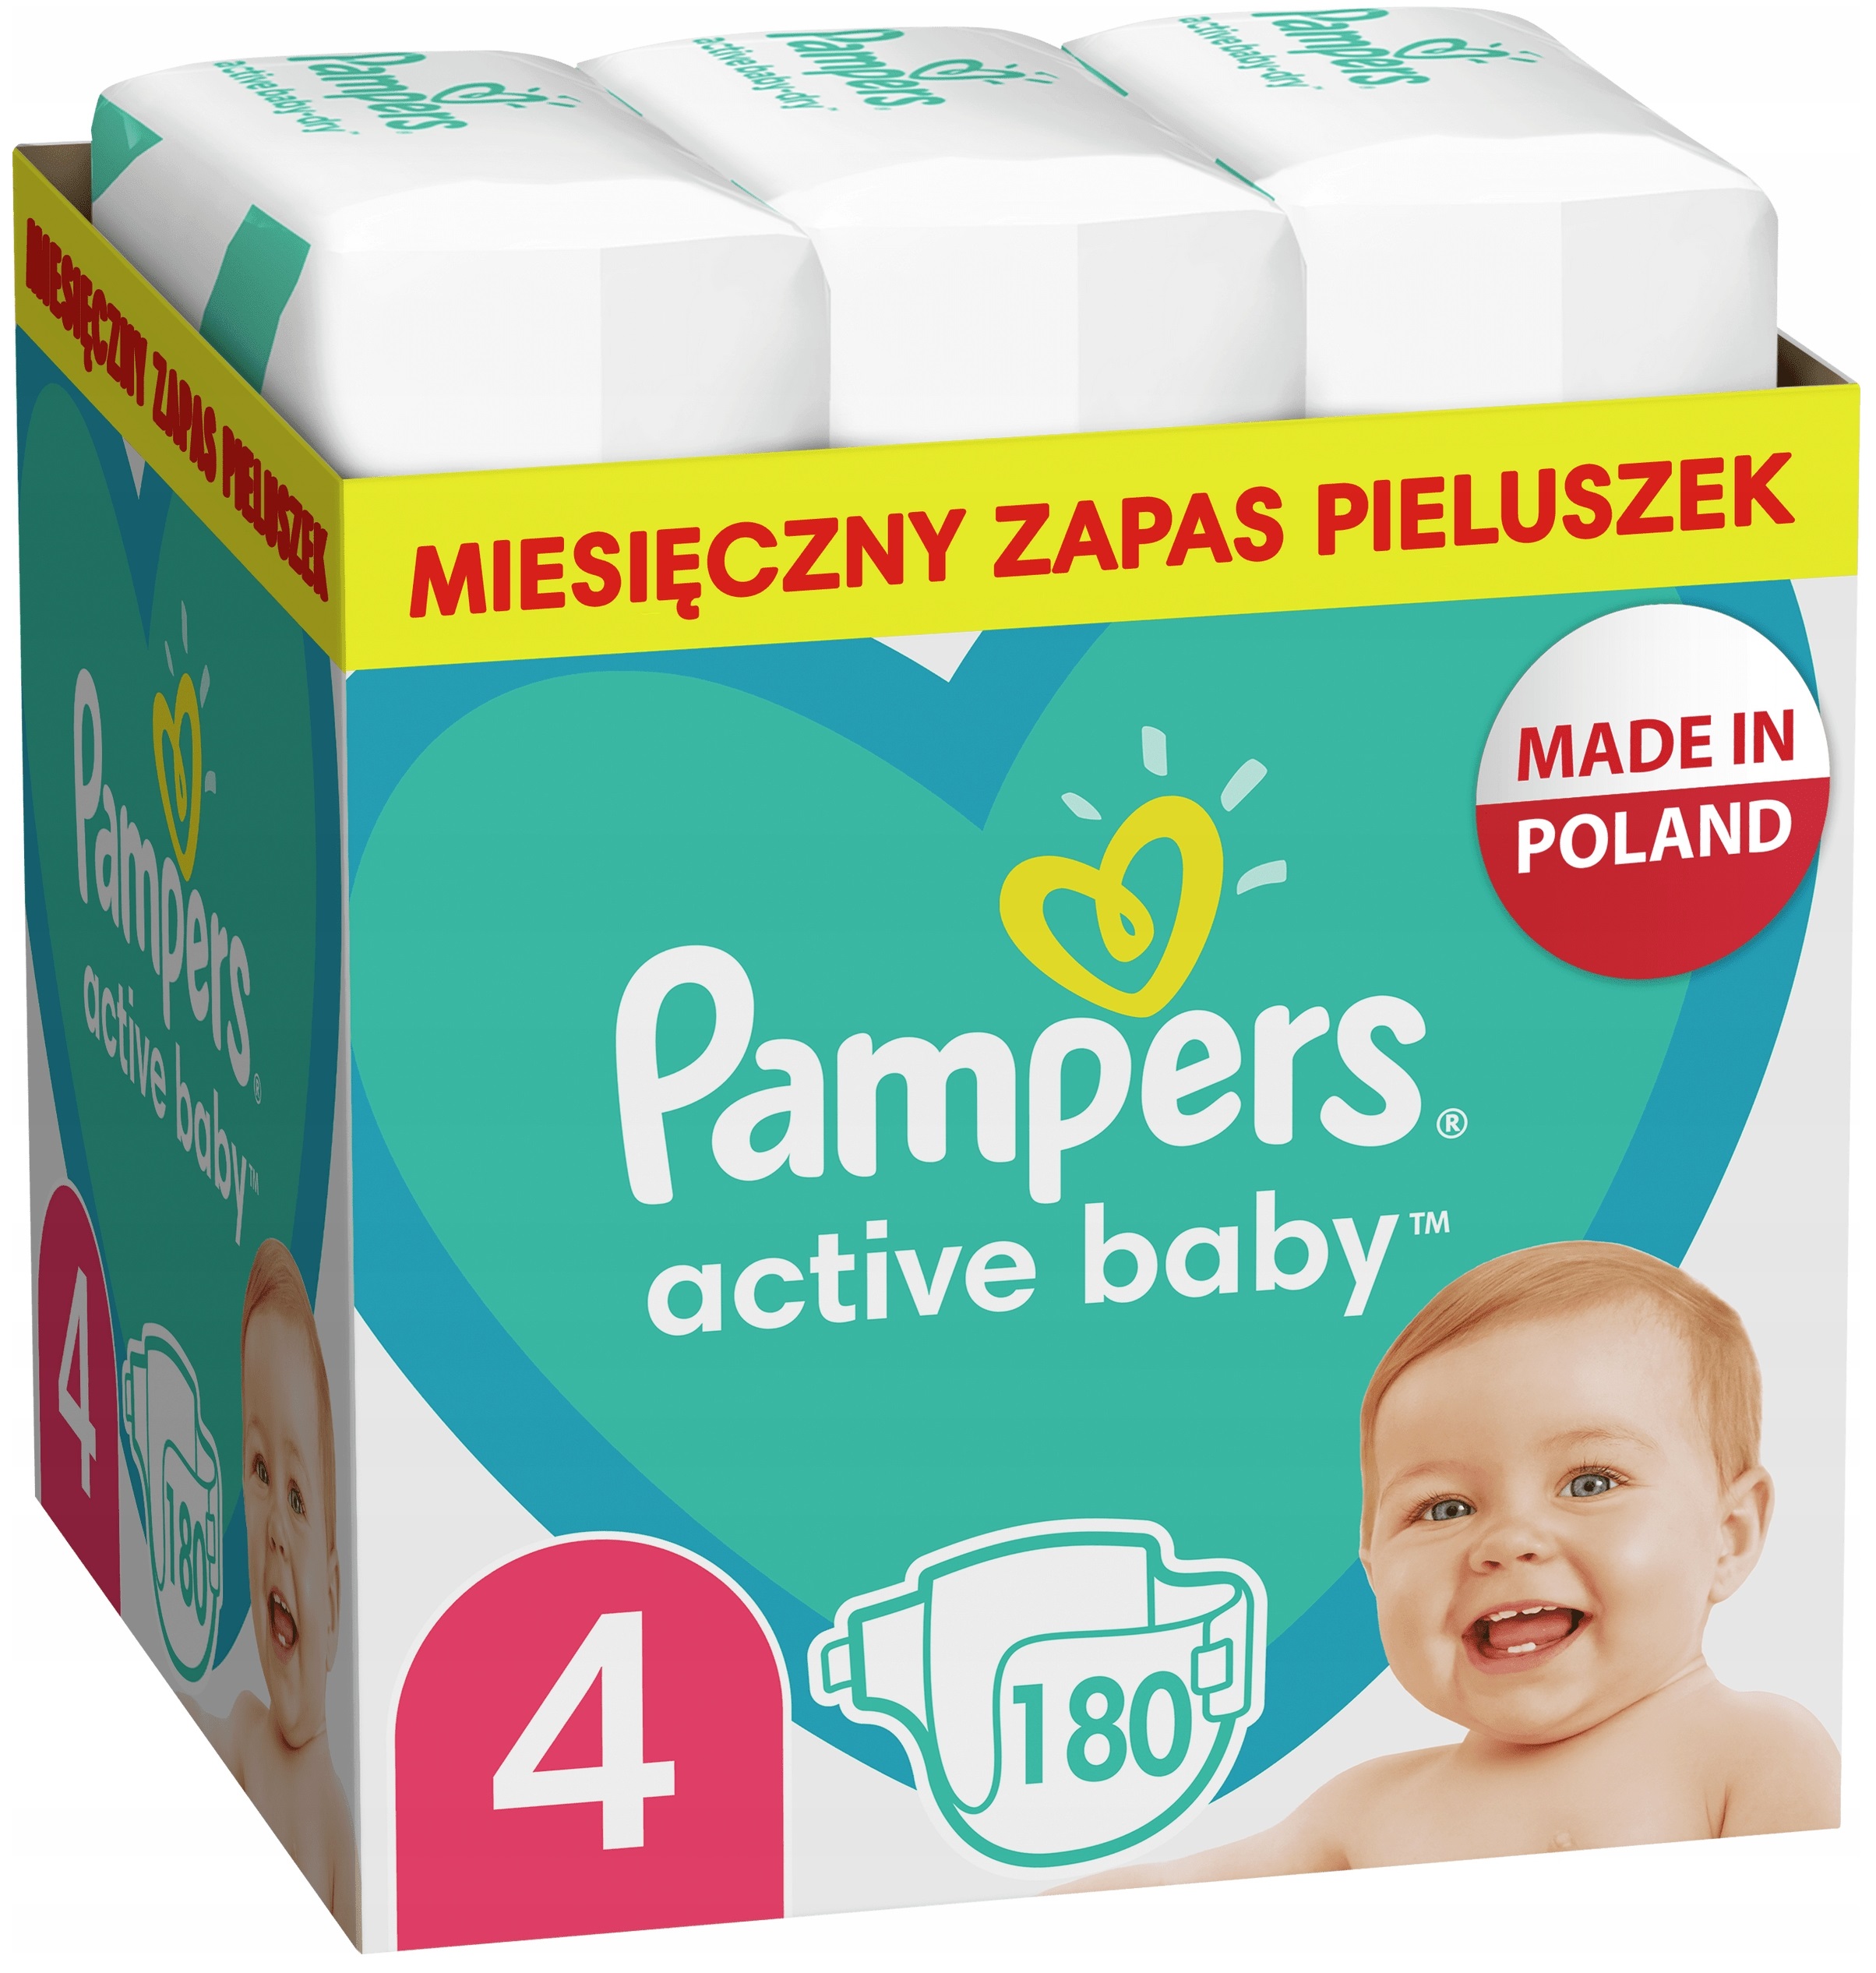 pampers 96 size 1